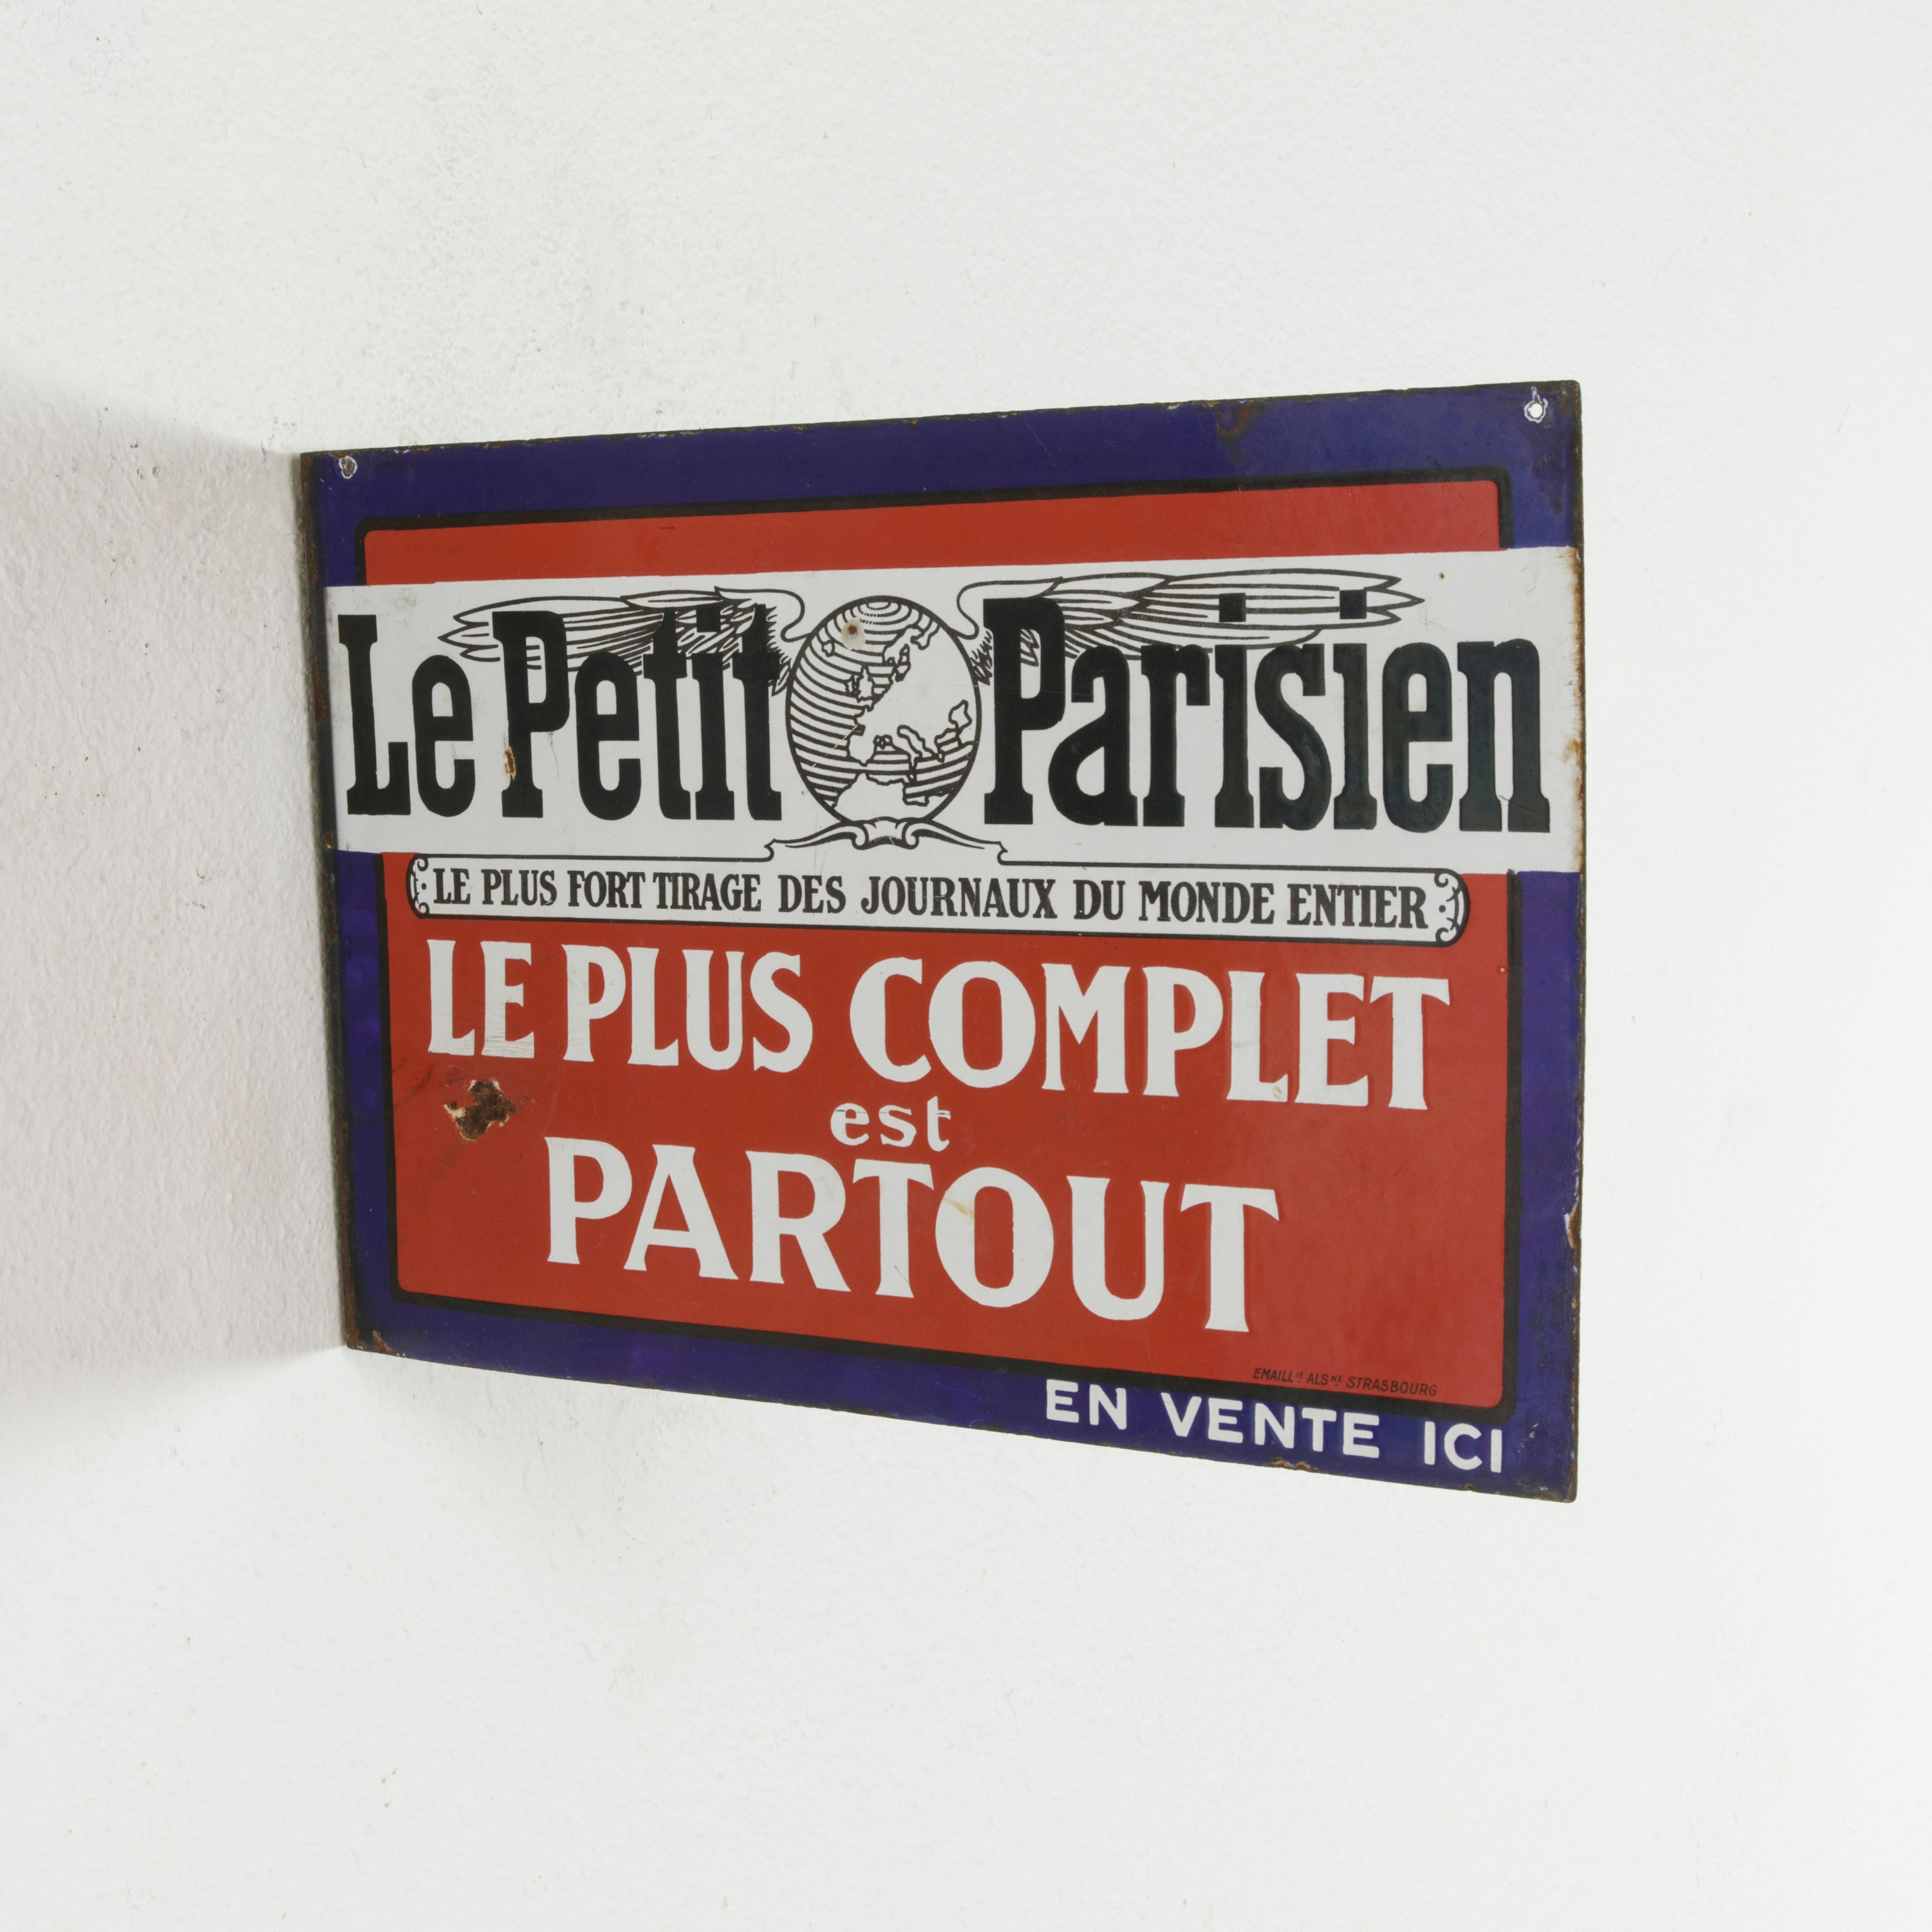 This early 20th century French enameled metal sign is double faced and features publicity for the newspaper Le Petit Parisien. The most prominent French newspaper of the Third Republic with publish dates between 1876 and 1944, its circulation was